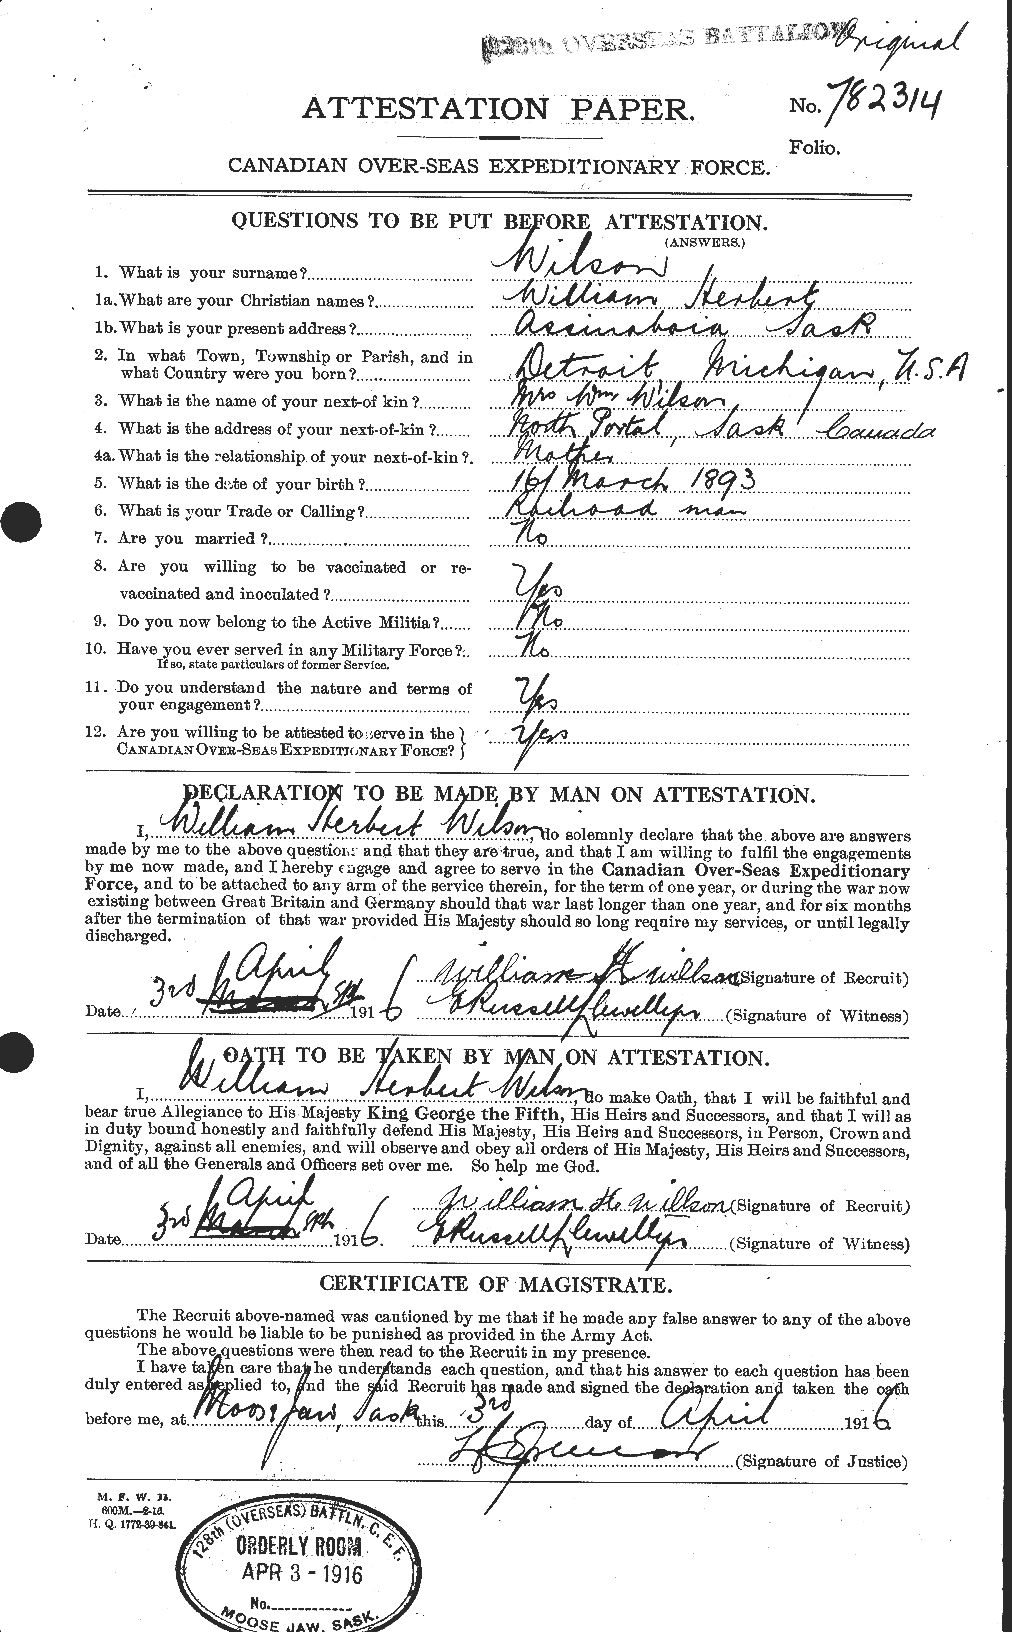 Personnel Records of the First World War - CEF 682036a